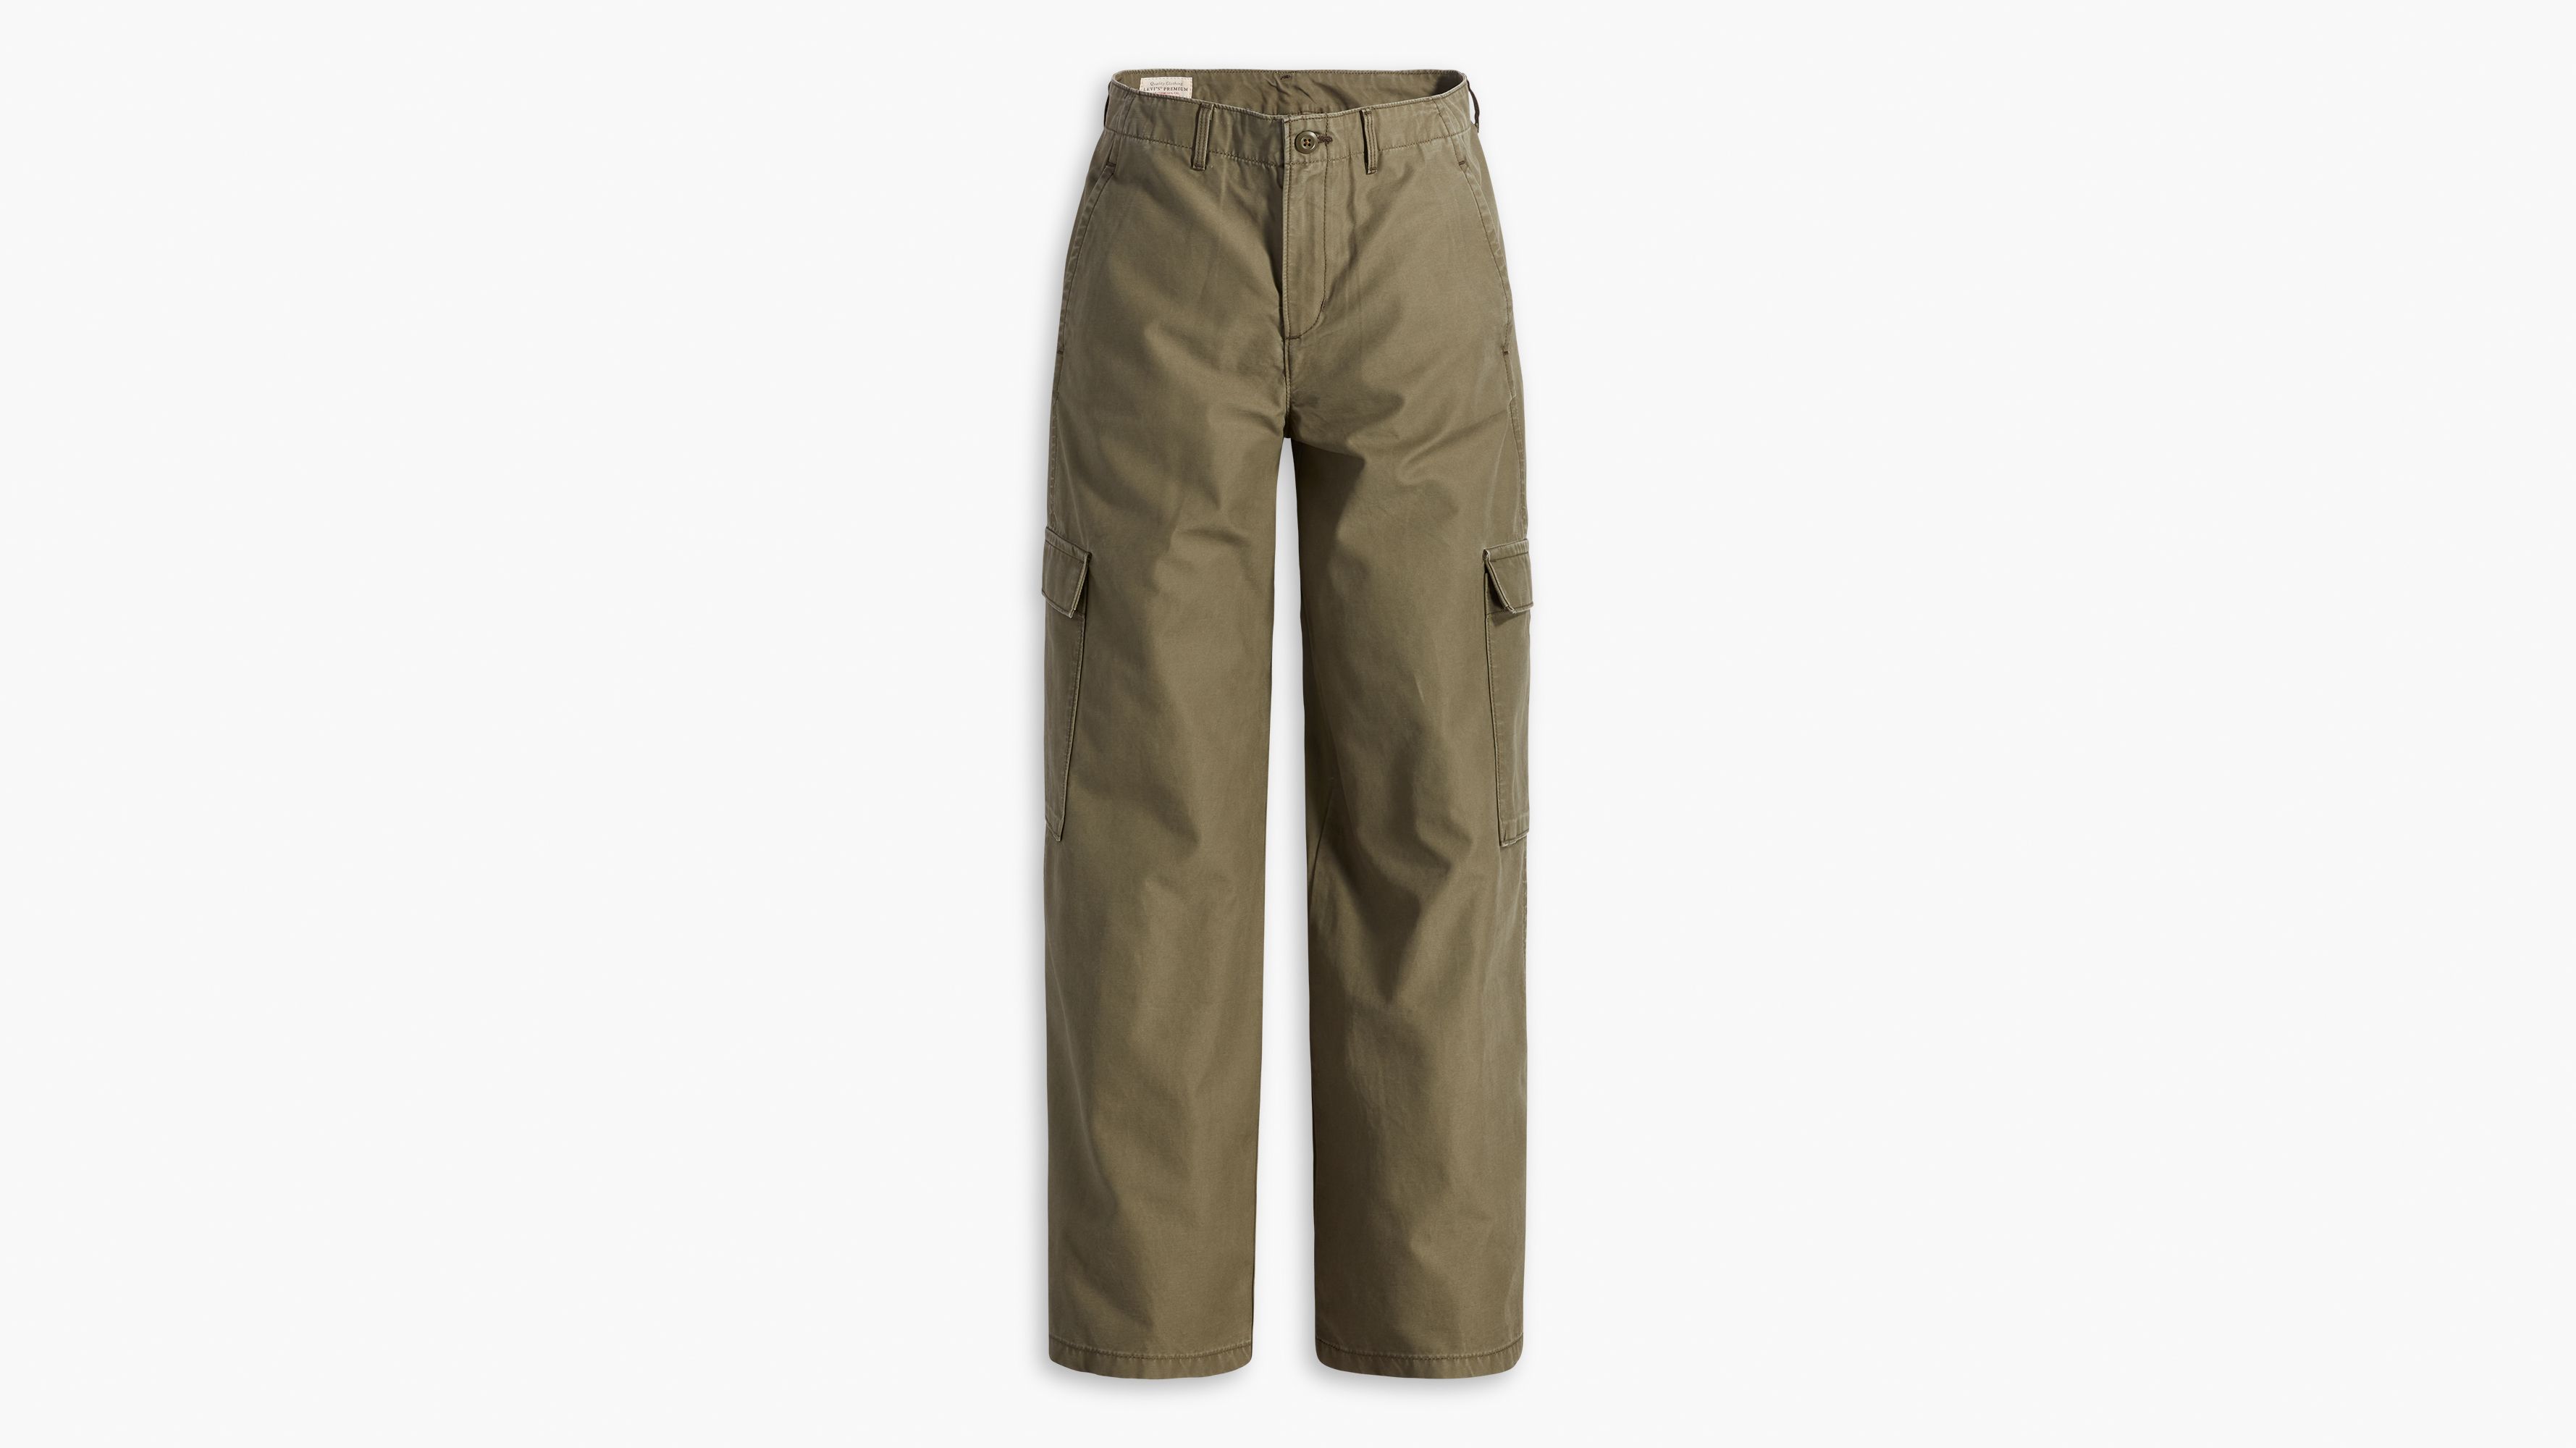 A New Day Solid Green Cargo Pants Size 14 - 46% off